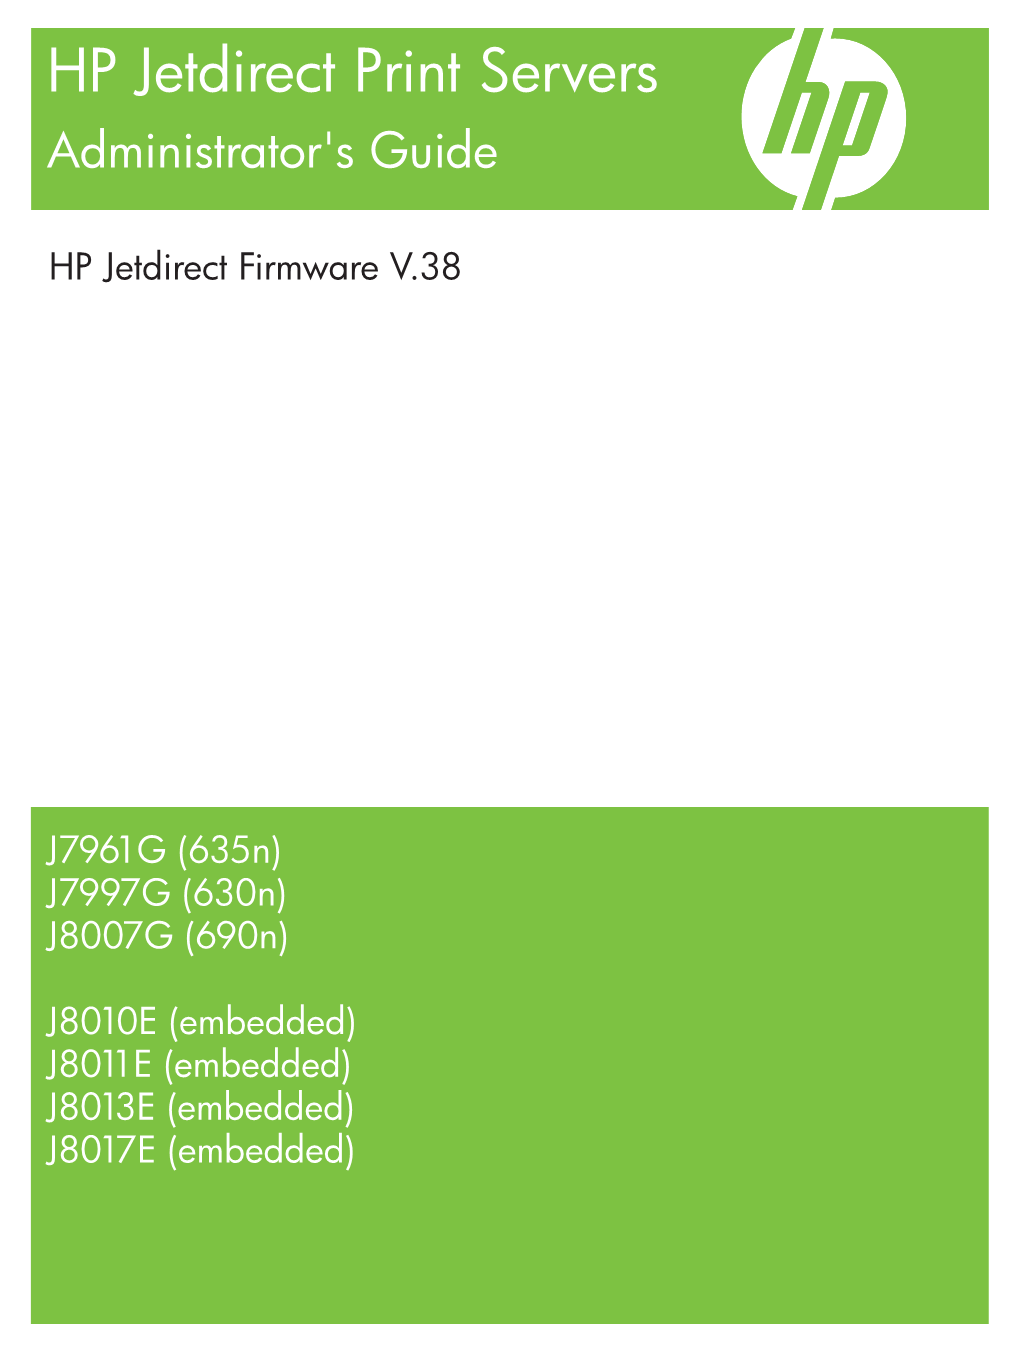 HP Jetdirect Print Servers Administrator Guide – ENWW